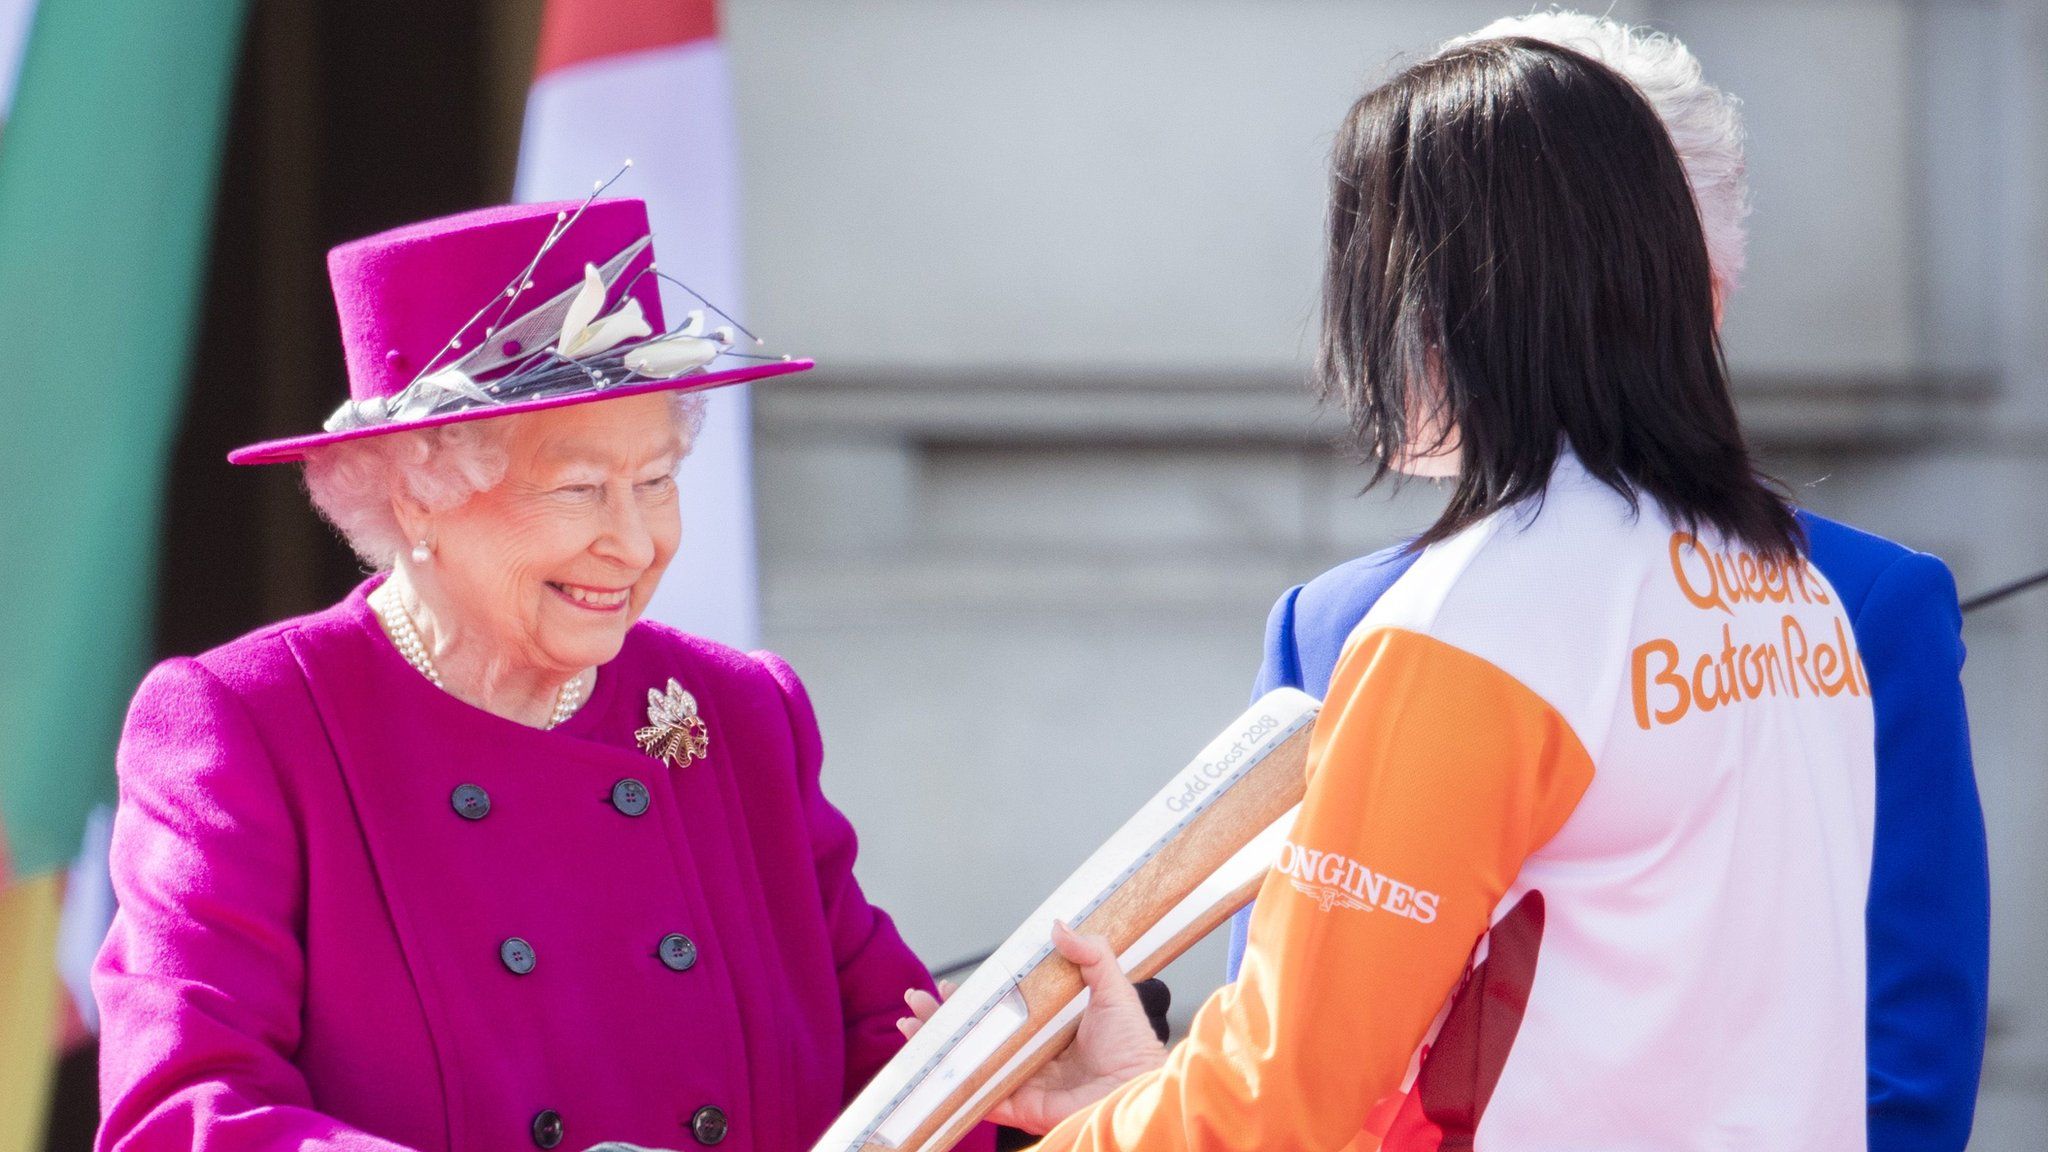 The Queen passes the Commonwealth Games baton to Australian cyclist Anna Meares